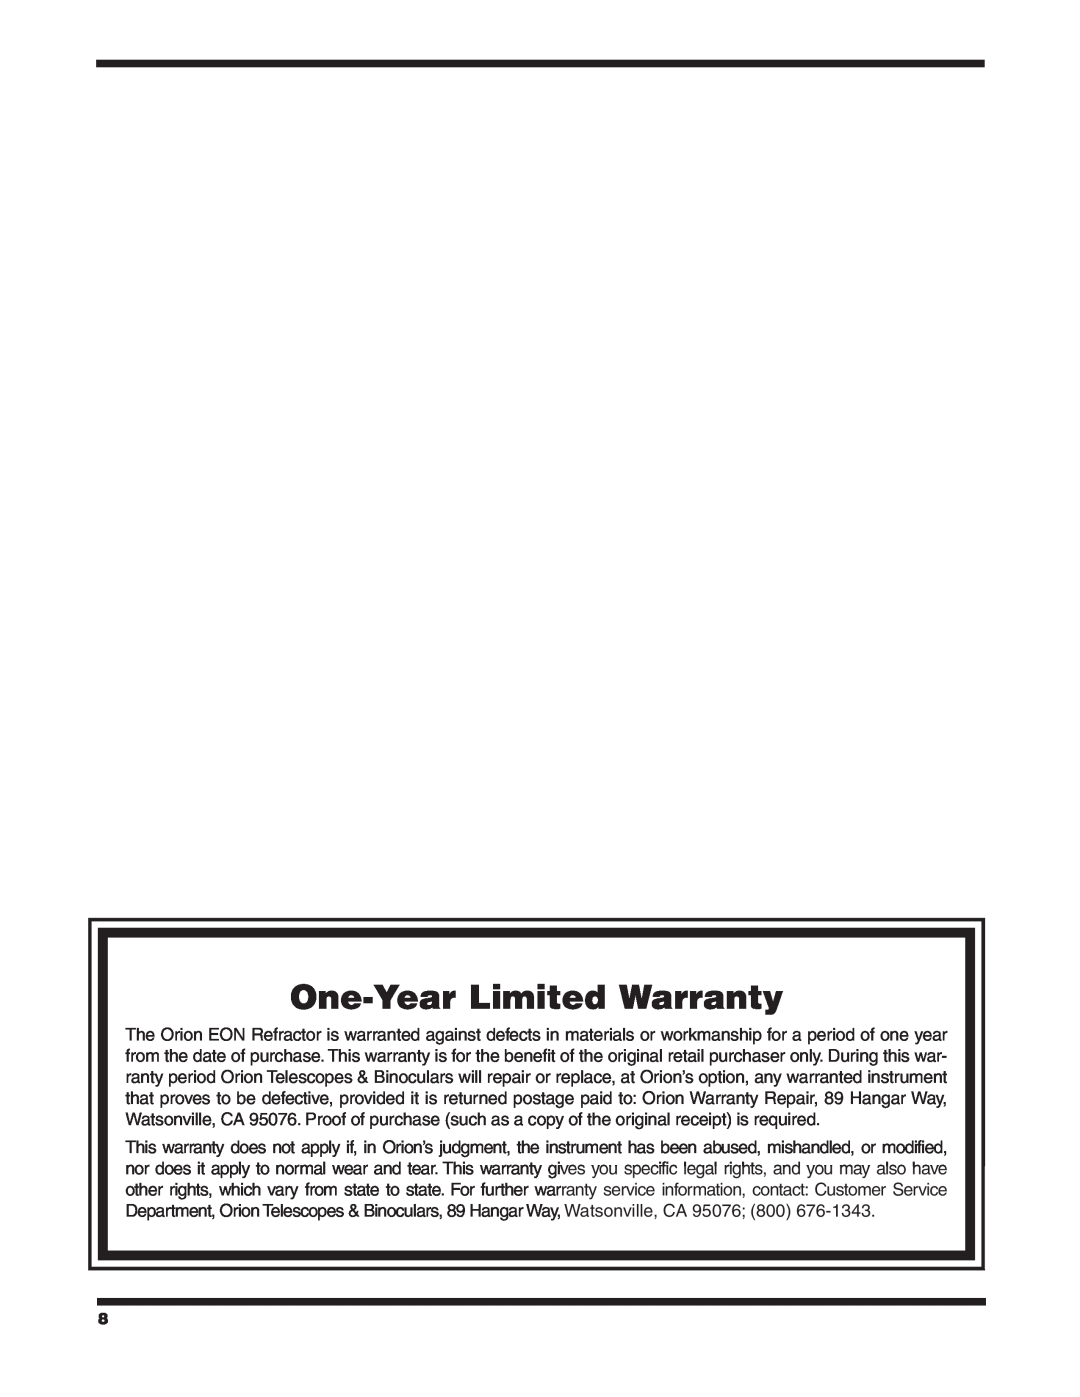 Orion #9781 EON 72MM instruction manual One-YearLimited Warranty 